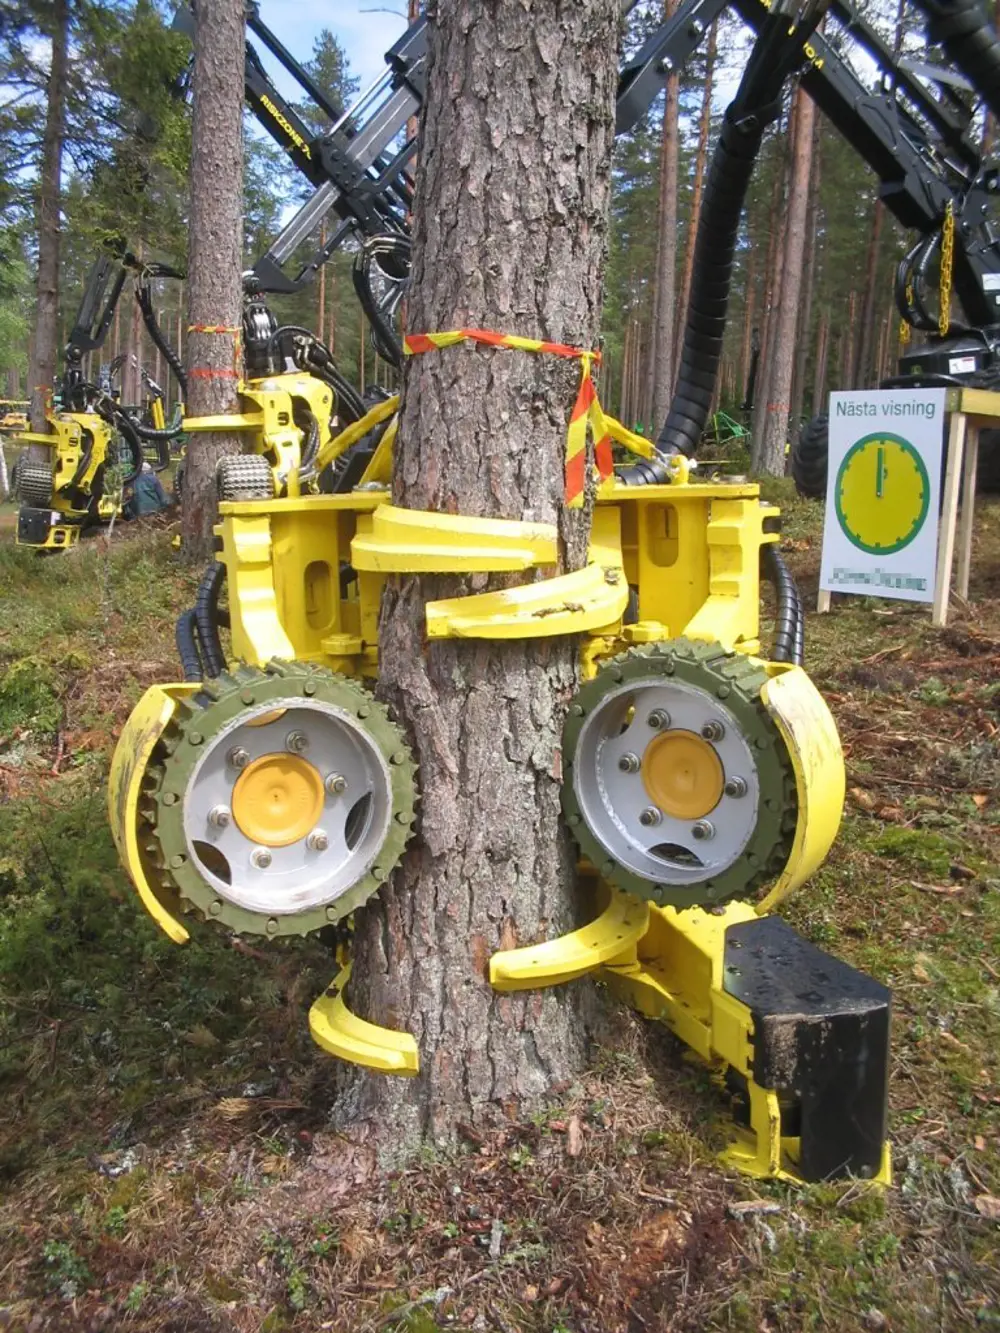 A tree harvester gripping the base of a tree, with its circular chainsaws cutting into the trunk.